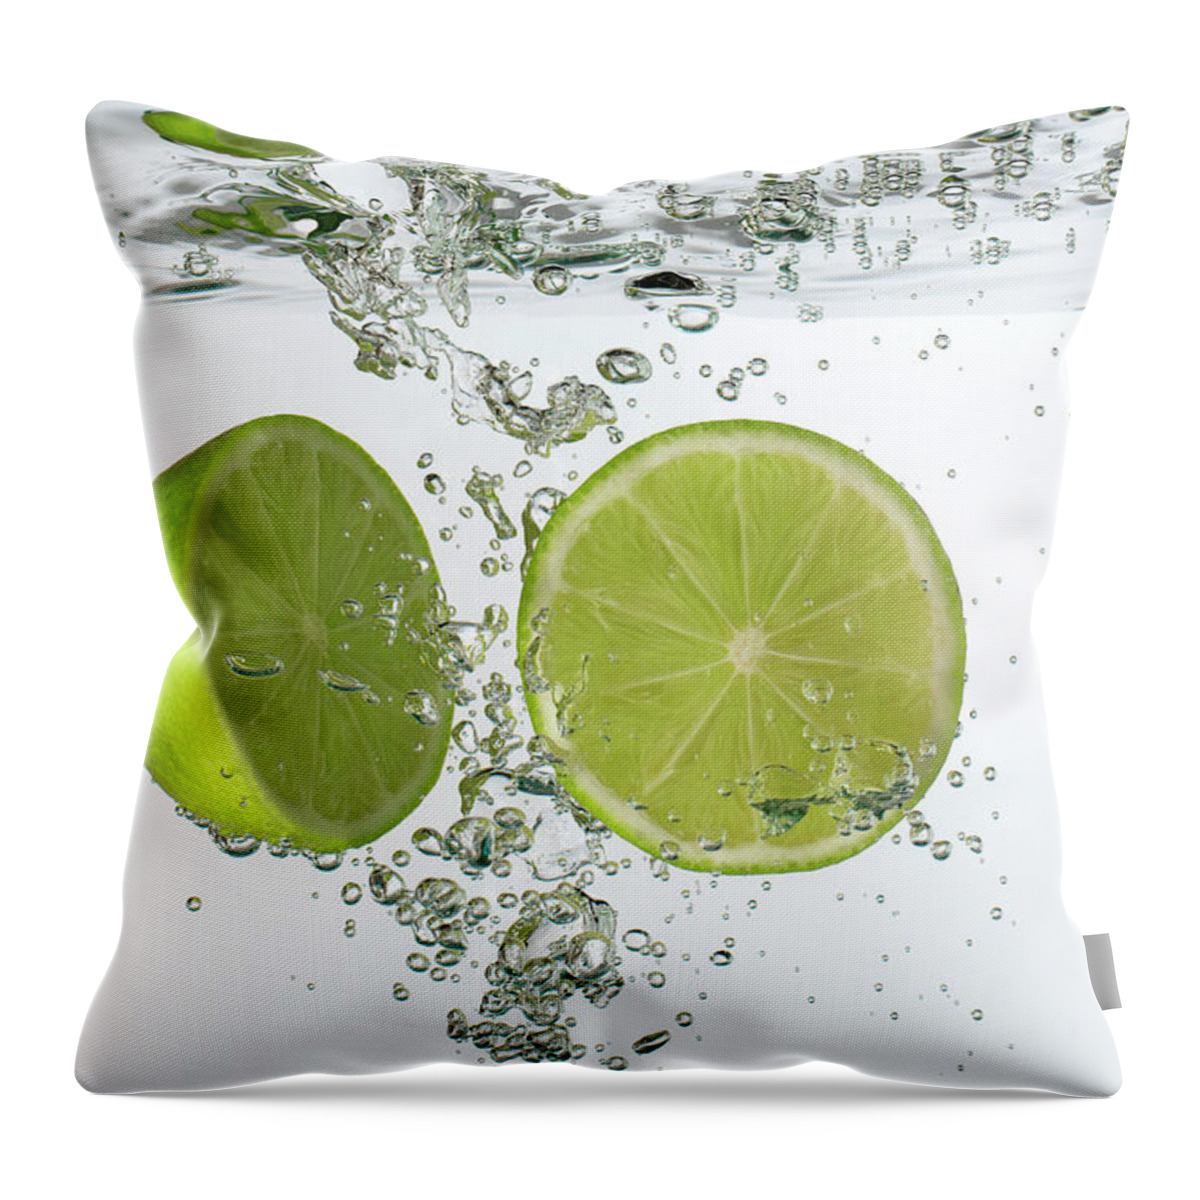 Vitamin C Throw Pillow featuring the photograph Lime Halves Submerged In Water by Photoalto/neville Mountford-hoare